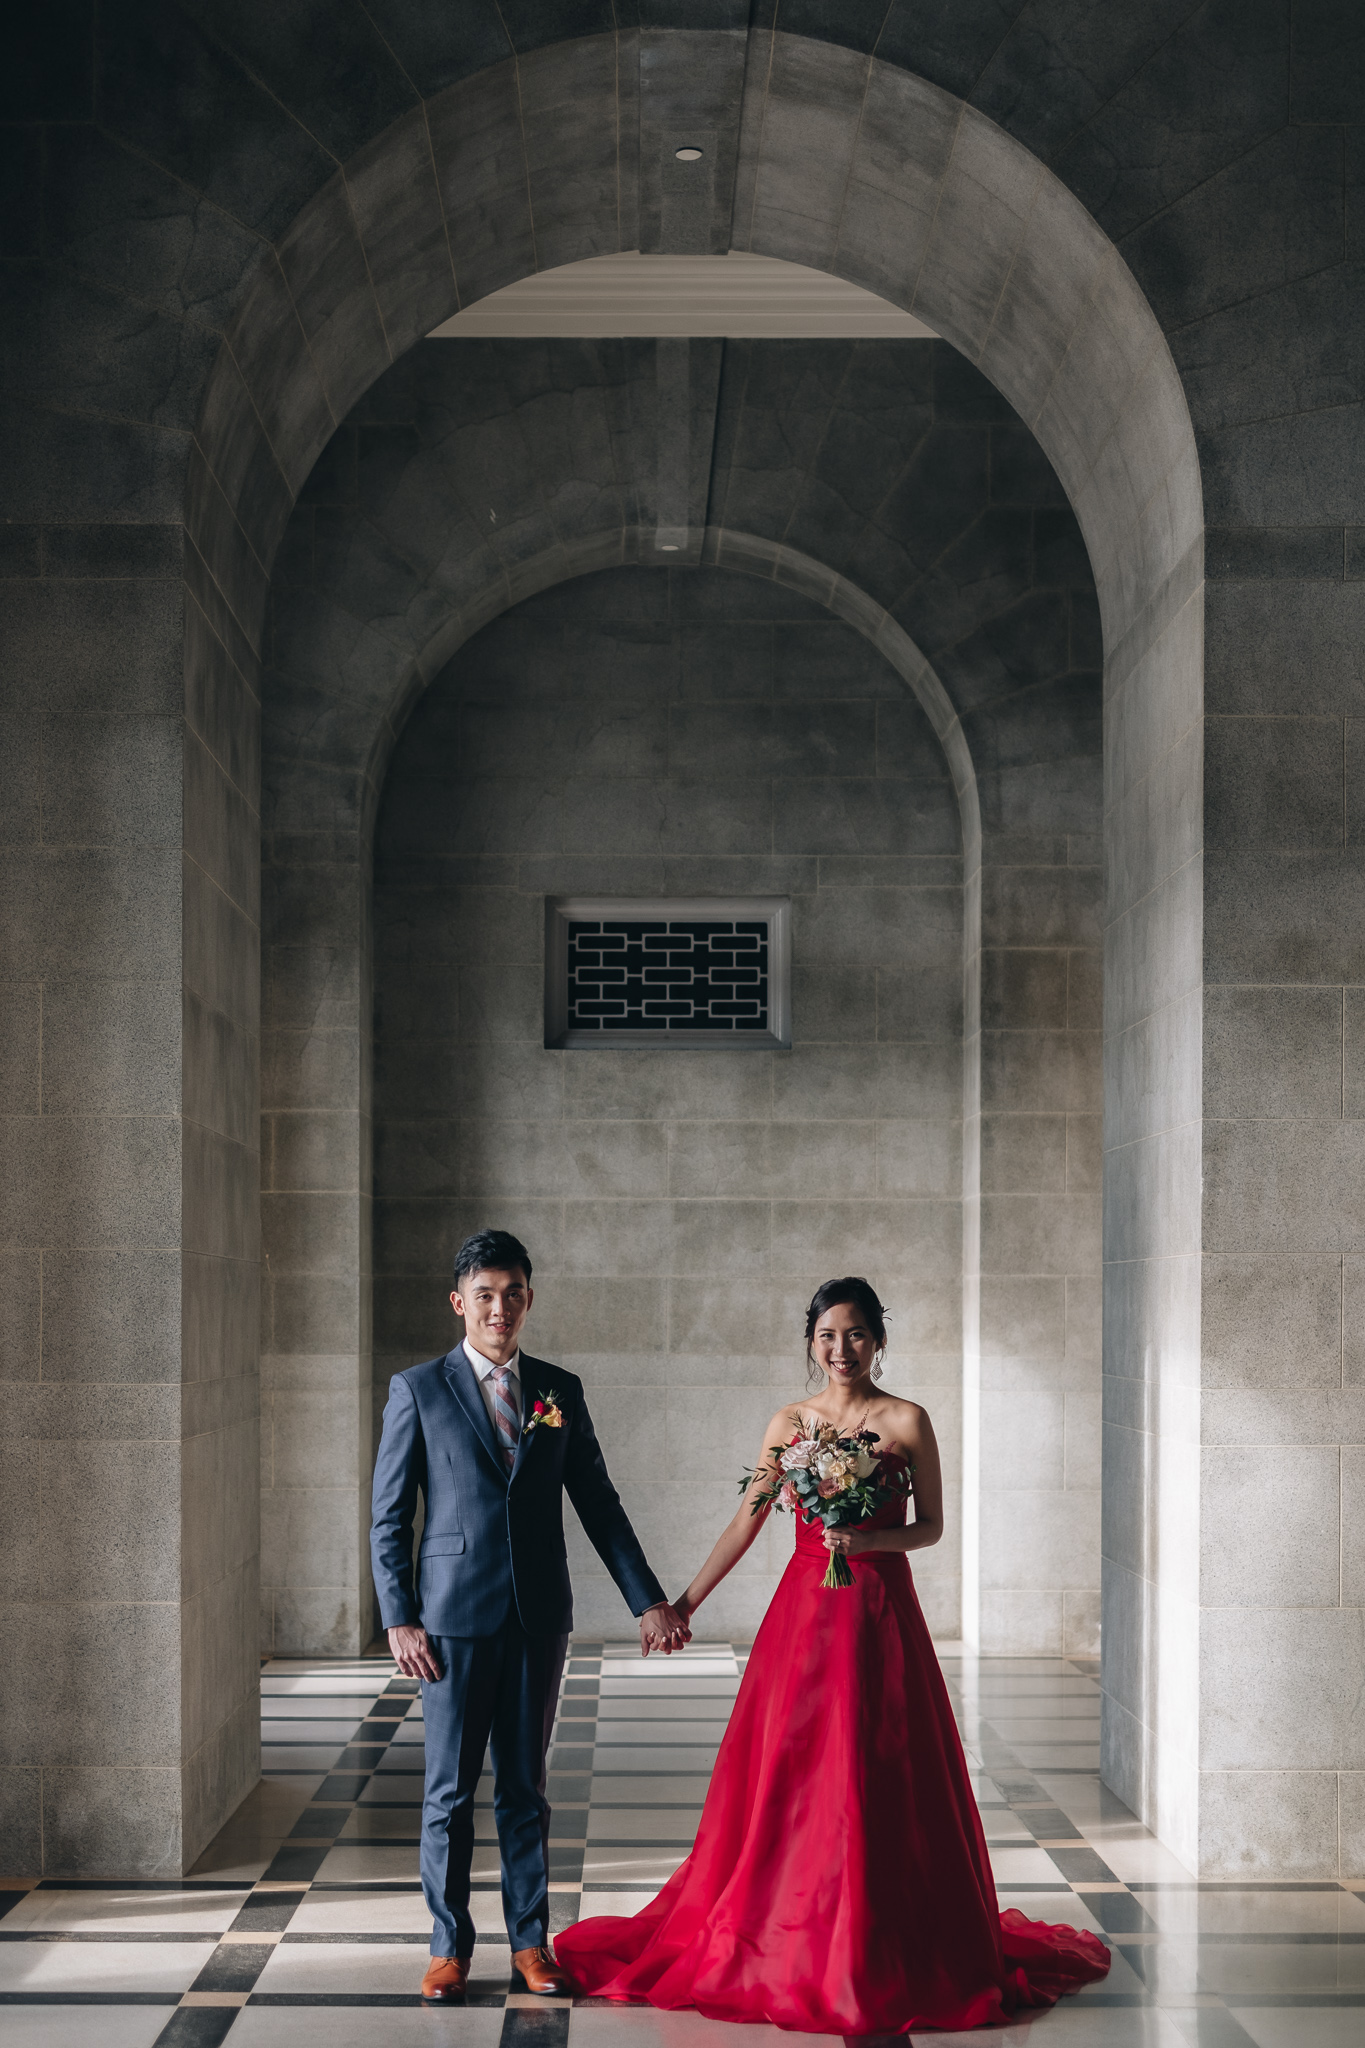 Kenneth & Lixin Pre-Wed (resized for sharing) - 021.jpg